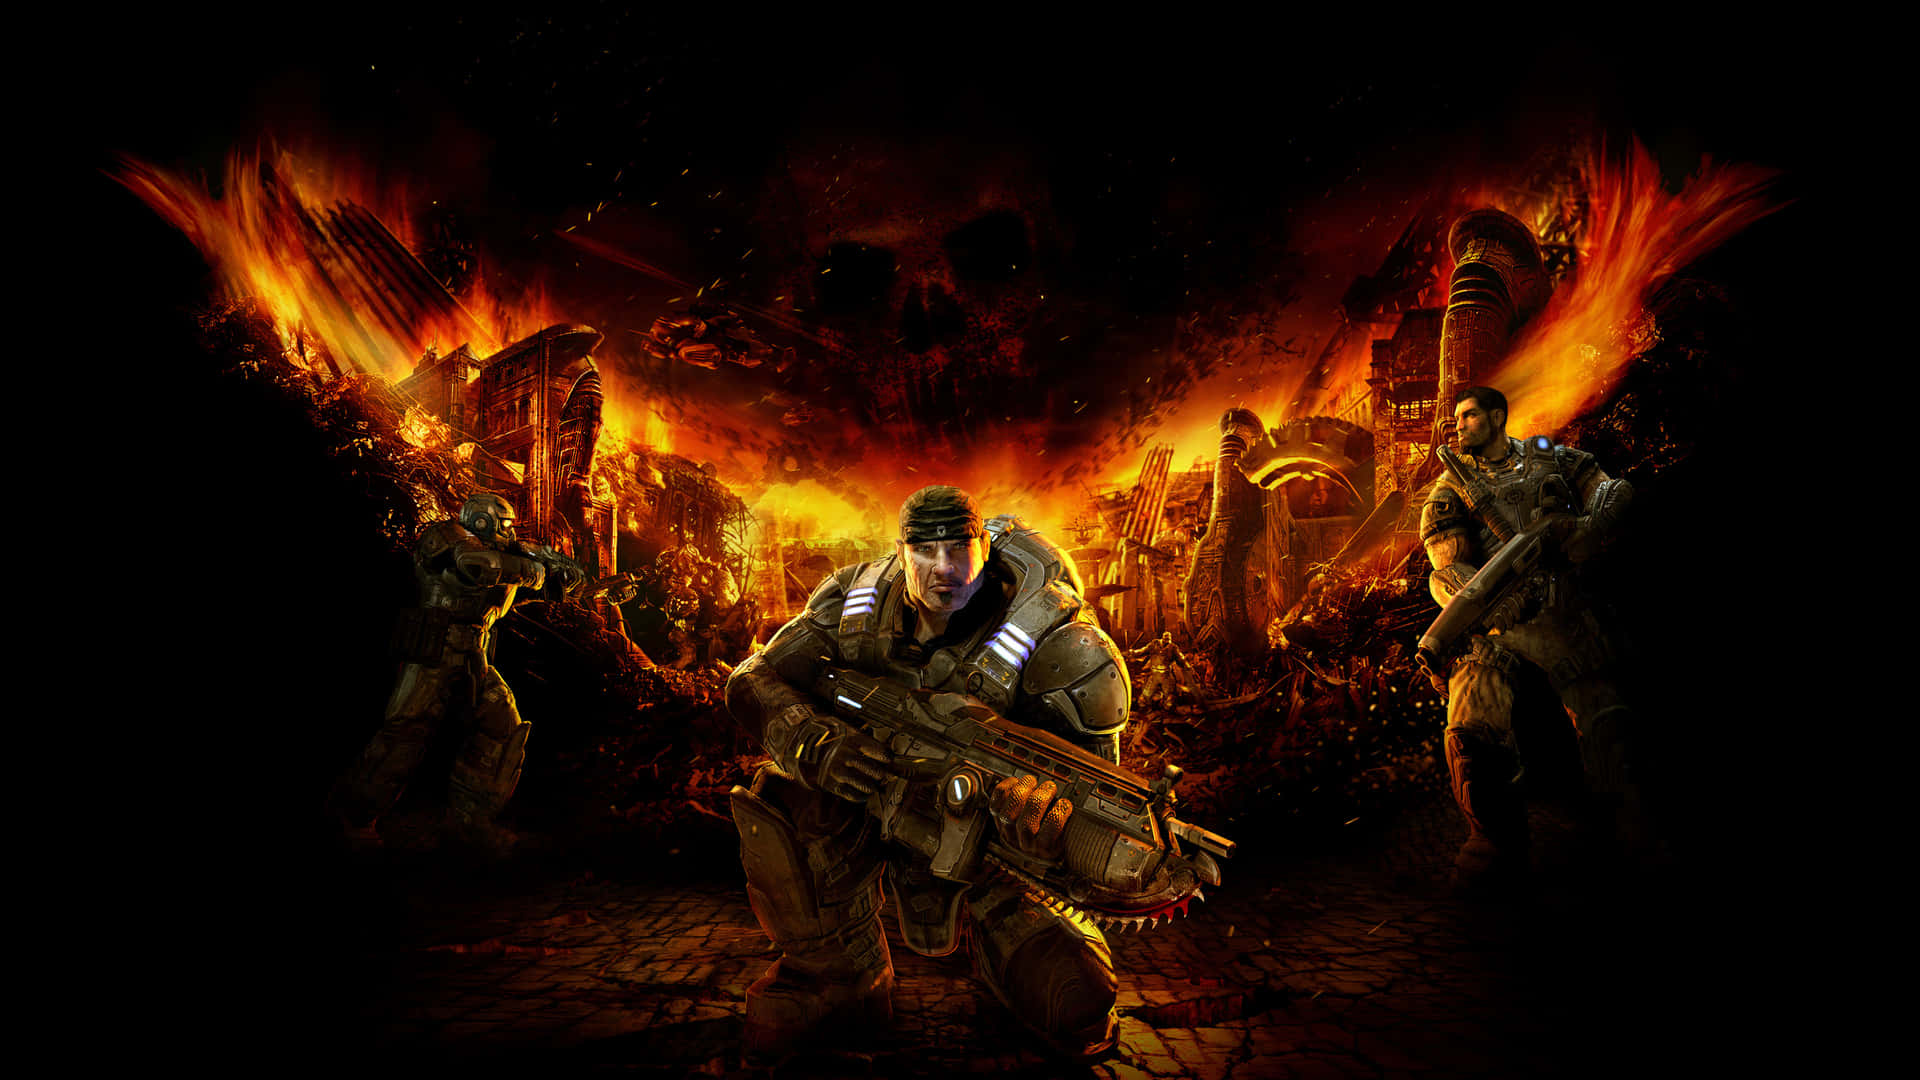 "Witness the epic battles of Gears of War with COG soldiers at the forefront!" Wallpaper